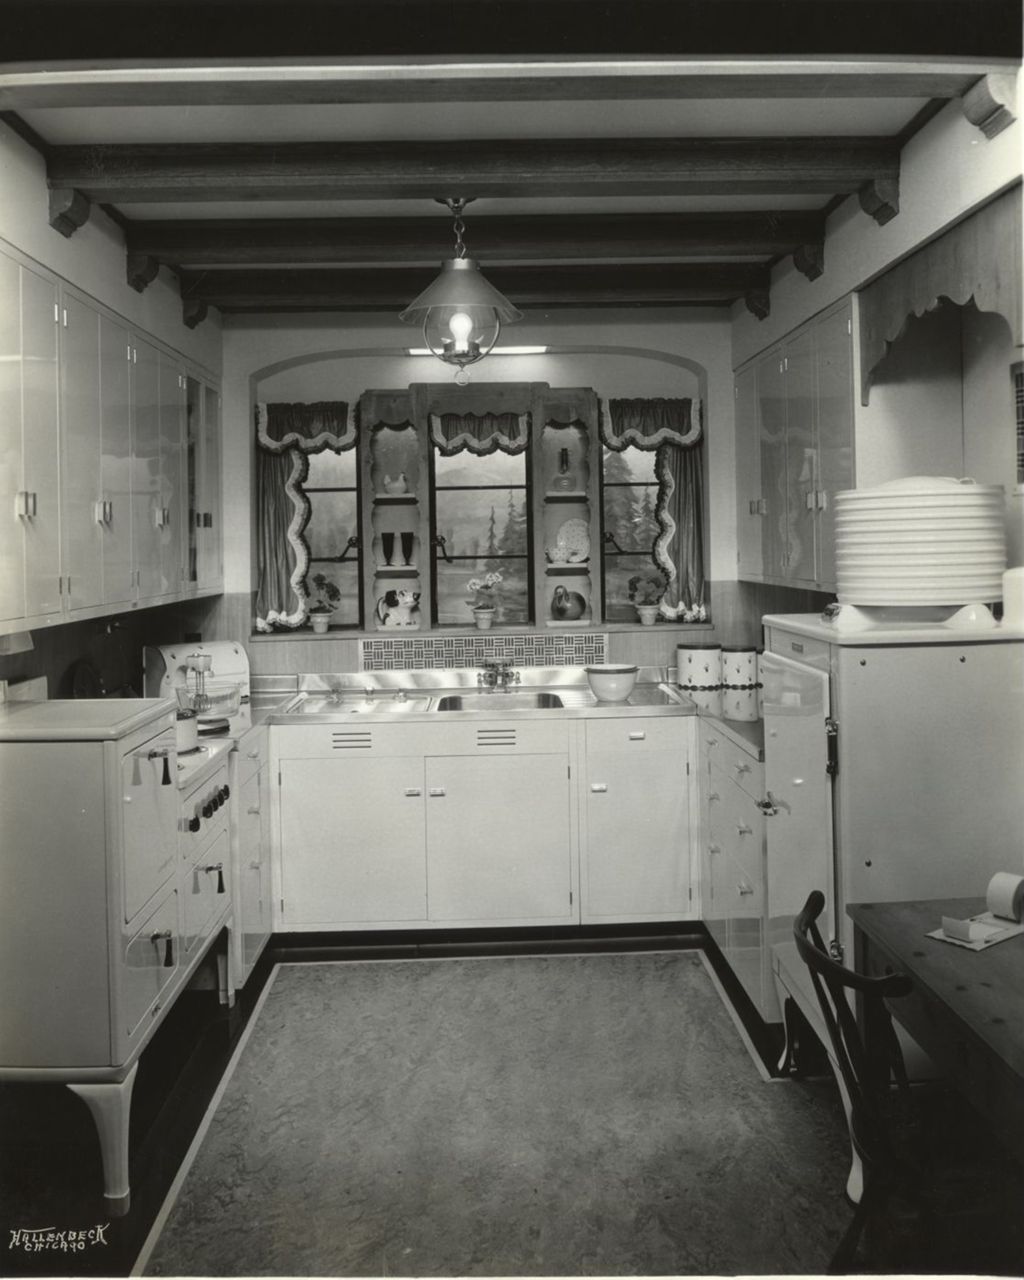 Miniature of Model electric kitchen is one of the features of the General Electric exhibit